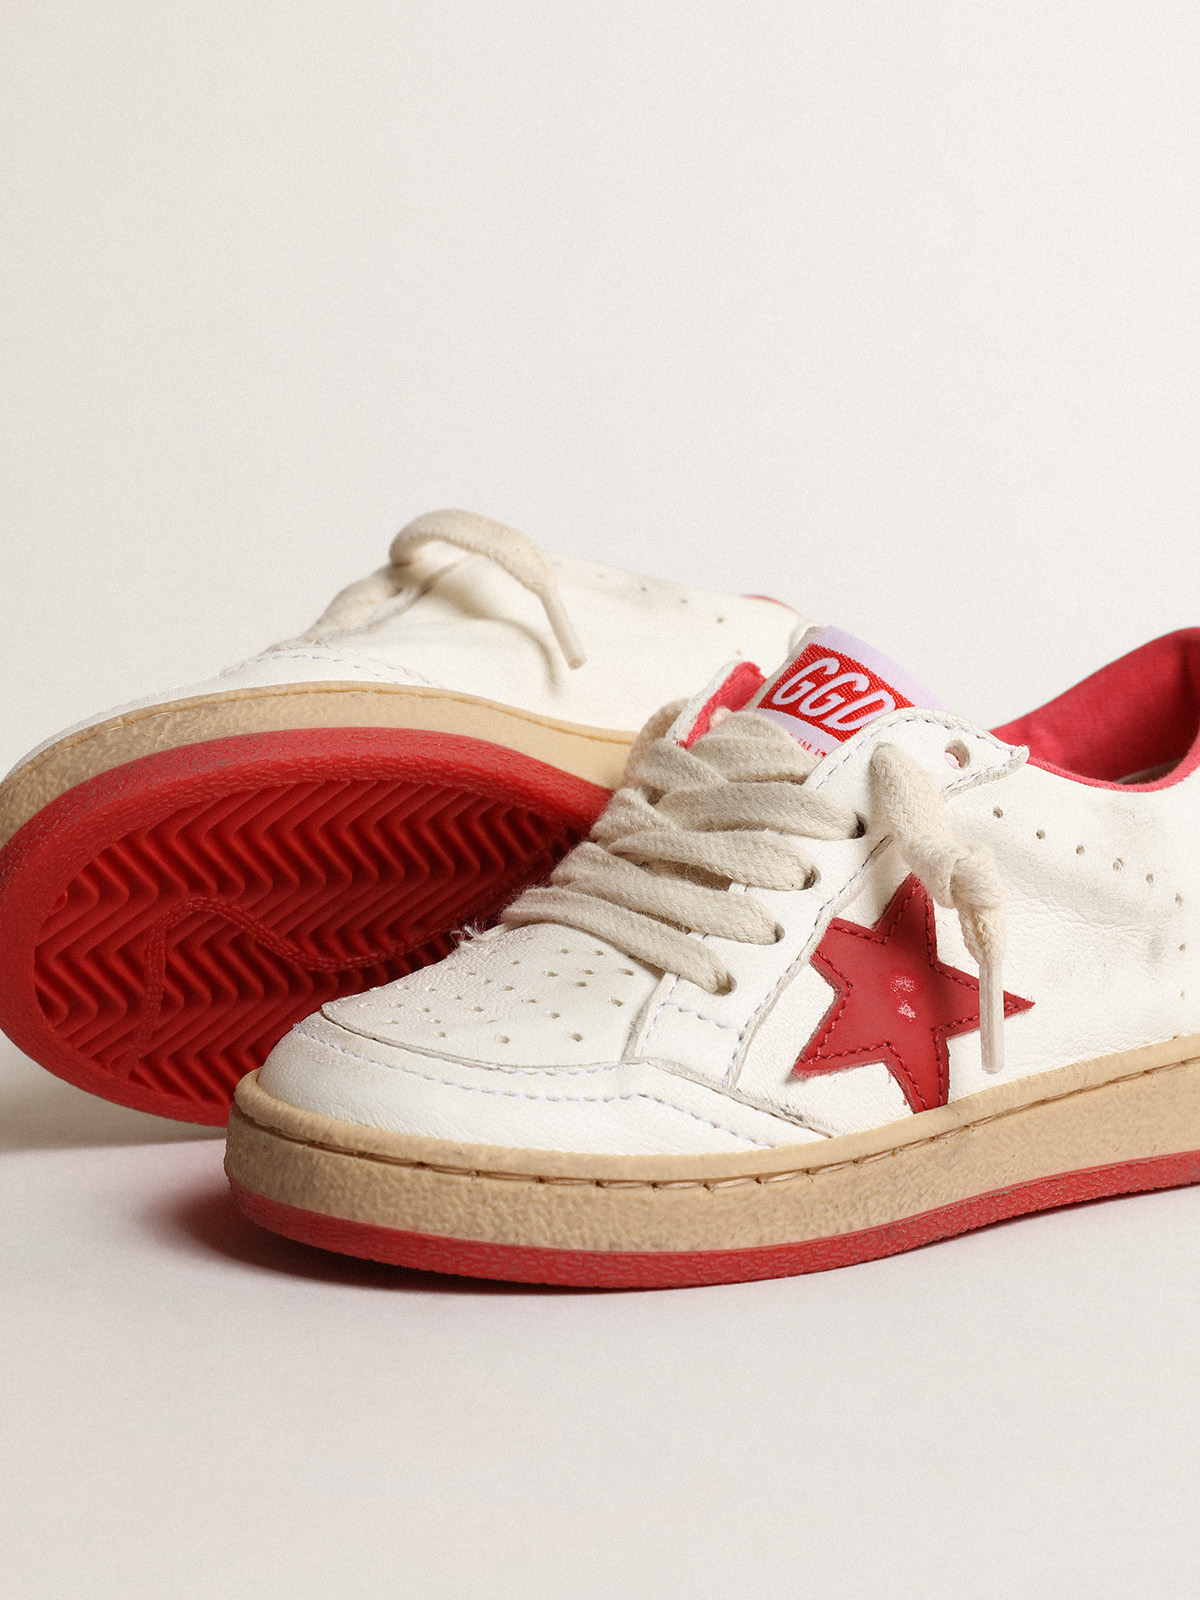 Ball Star Junior in nappa with red leather star and heel tab